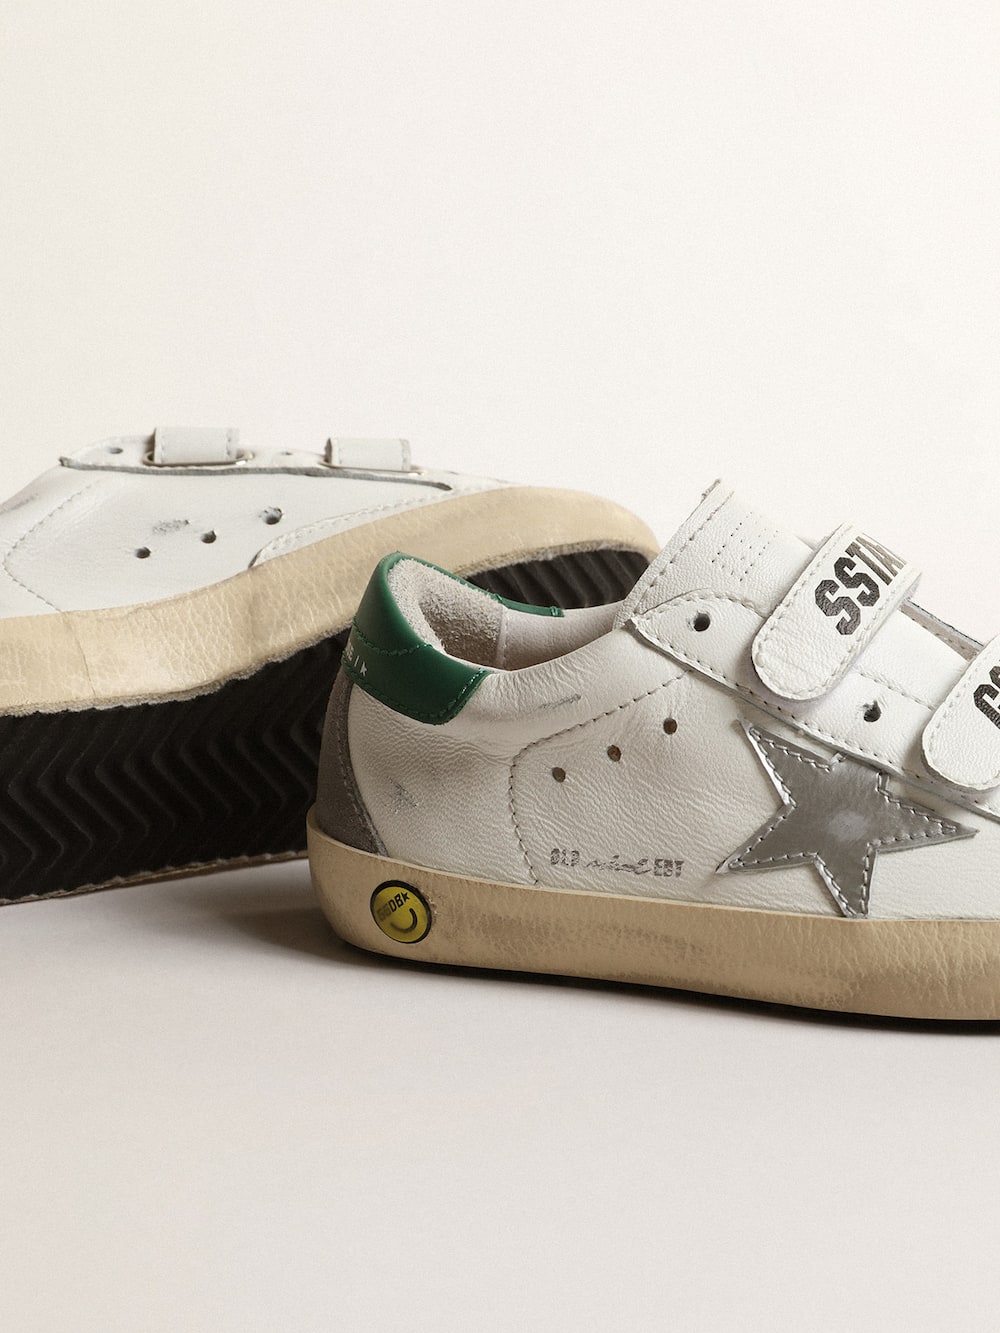 Golden Goose - Old School Young with metallic leather star and green heel tab in 